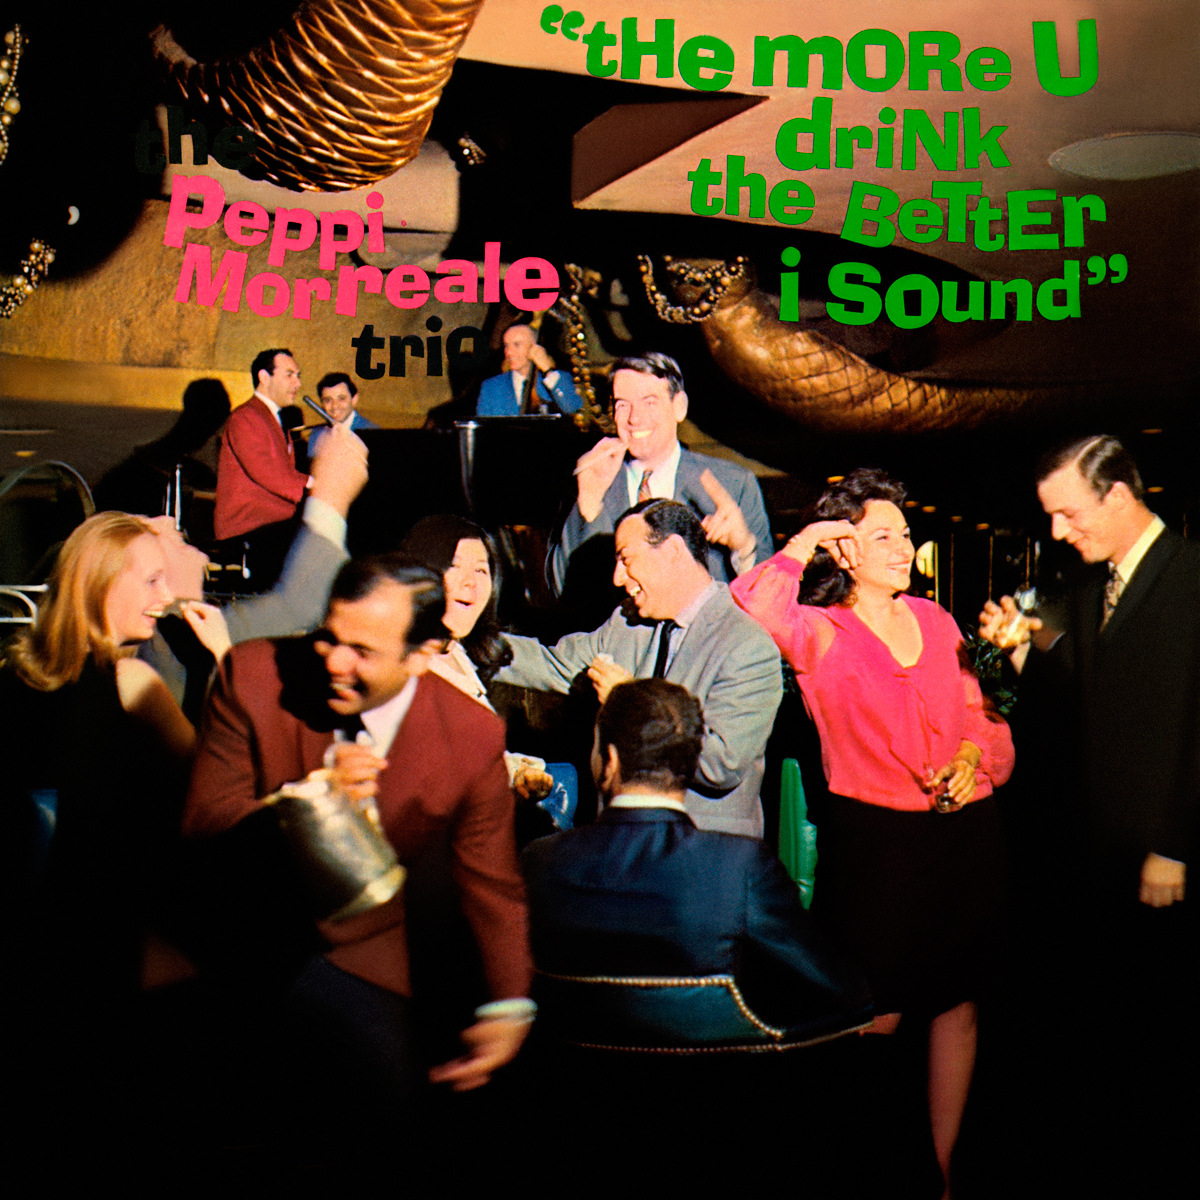 The Peppi Morreale Trio – The More You Drink The Better I Sound (1966/2017) [HDTracks FLAC 24bit/192kHz]